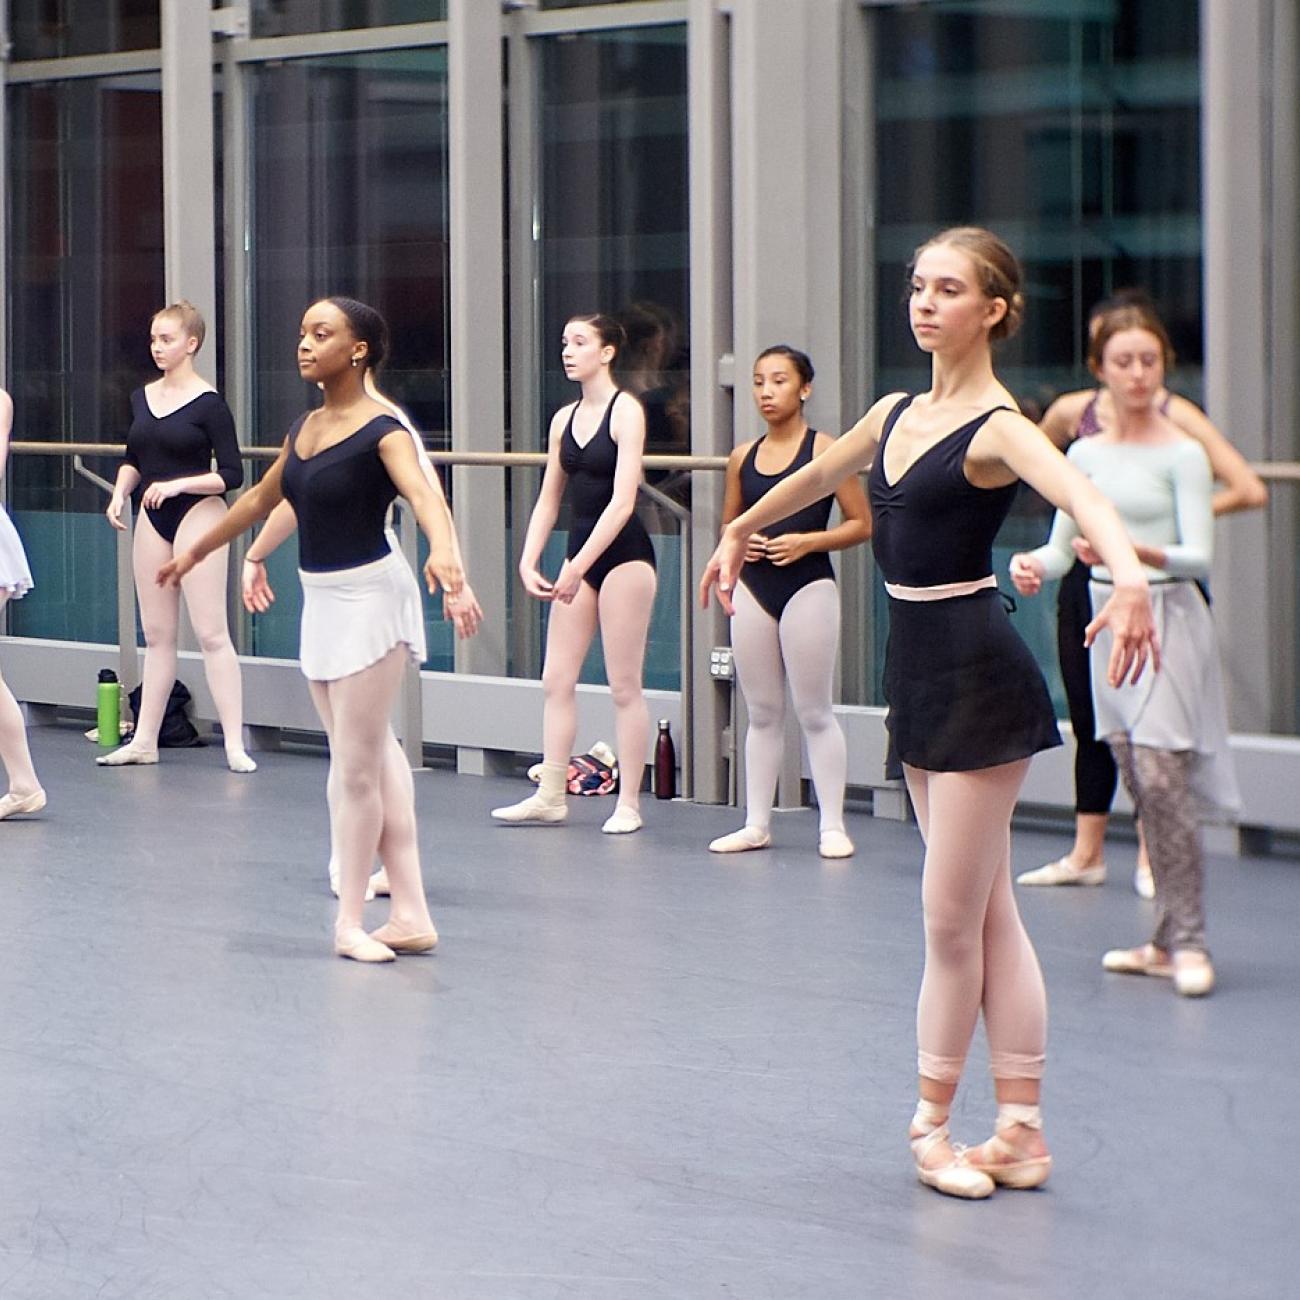 A masterclass in the Rubenstein Arts Center taught by ABT Studio Company’s current Ballet Mistress Petrusjka Broholm.